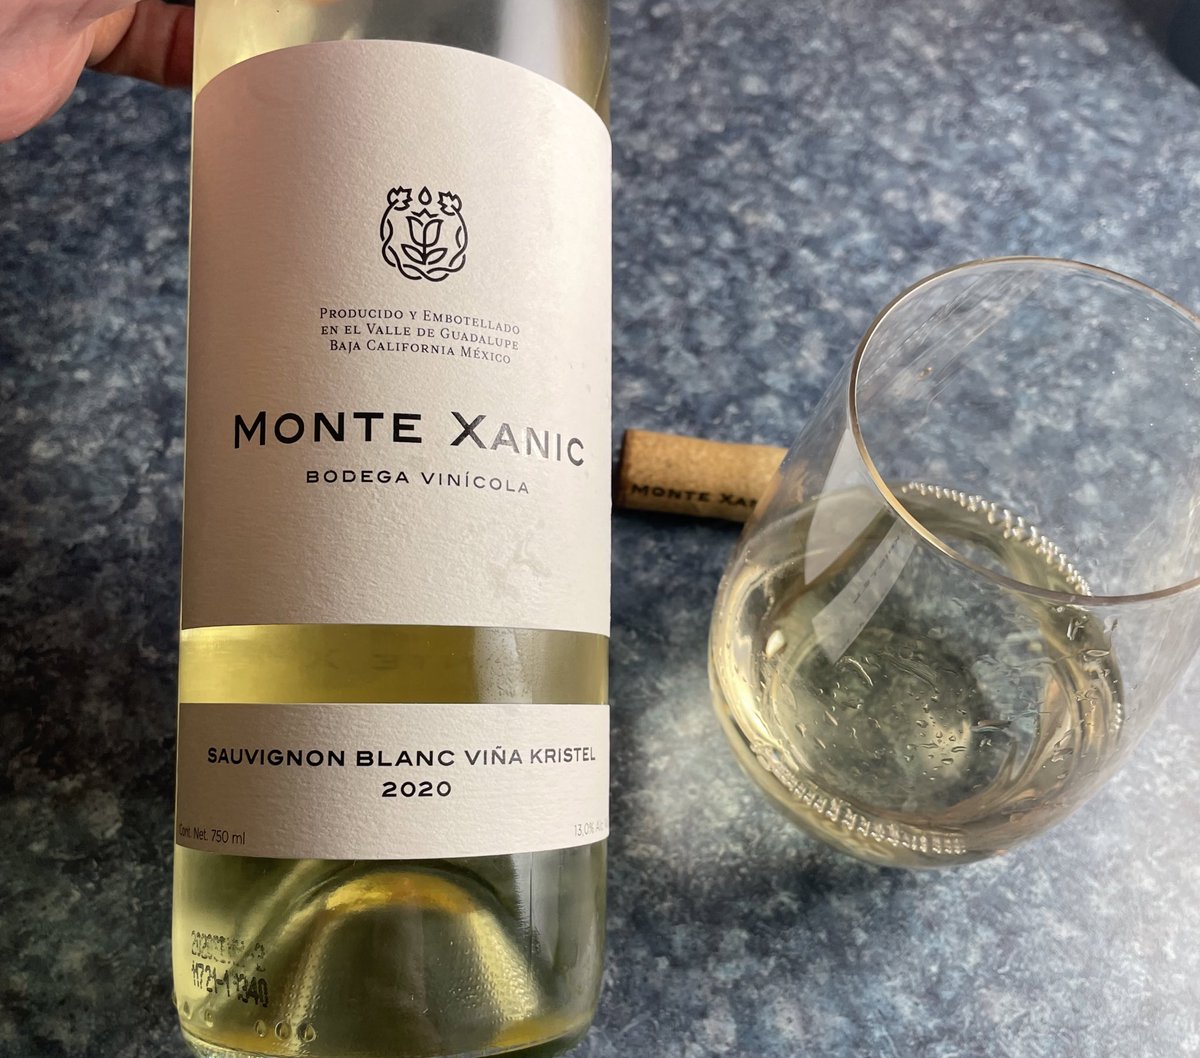 A little Sauv Blanc from Mexico tonight! #wiyg #wine #mexicanwine